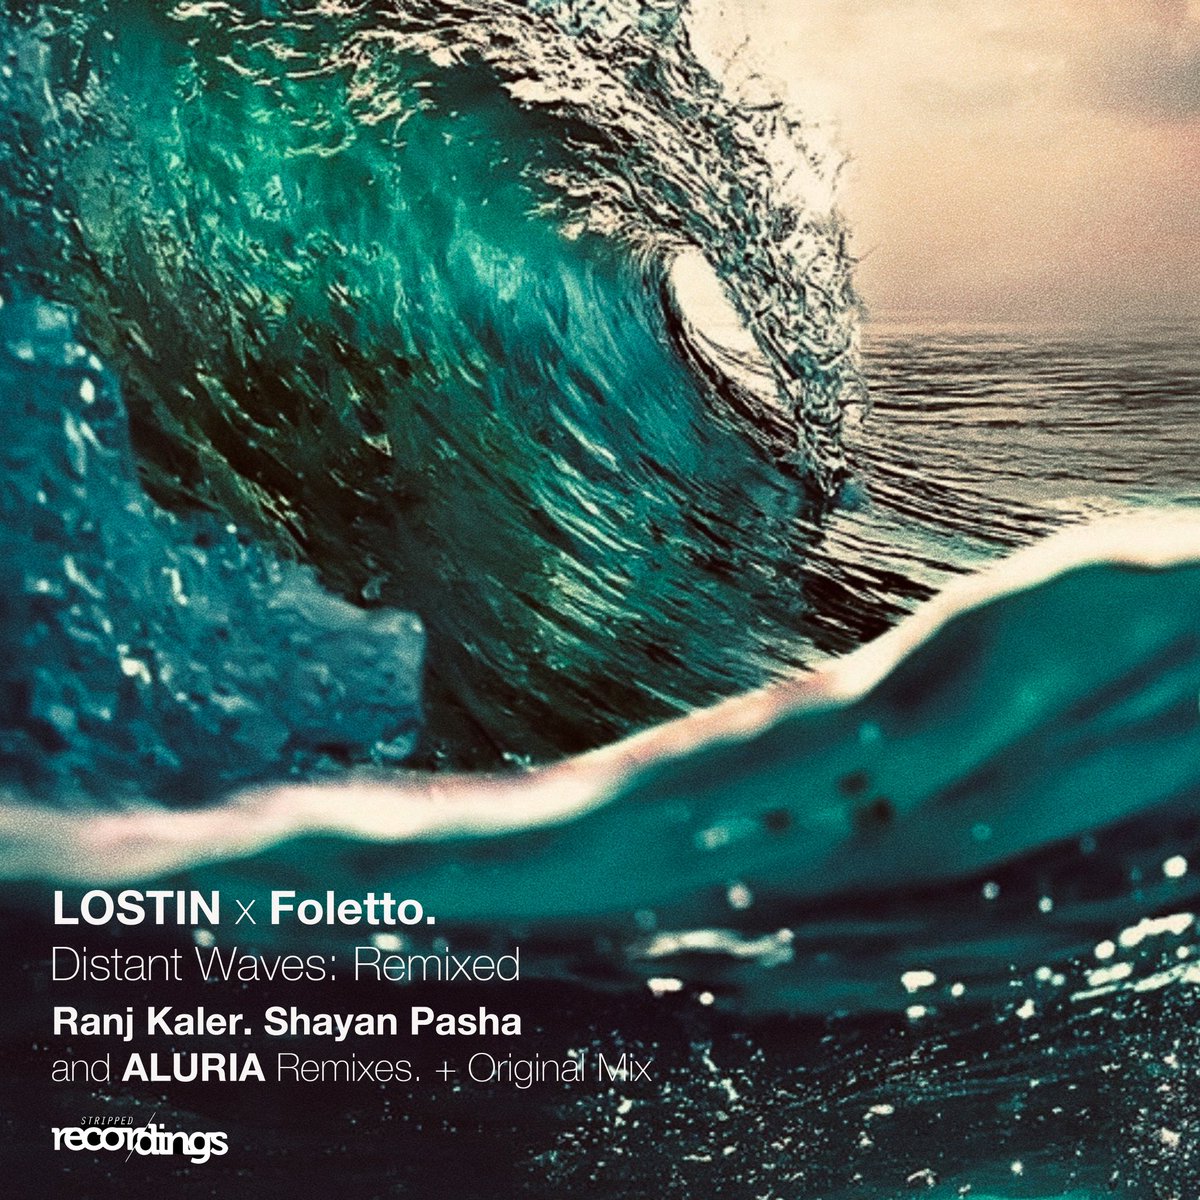 OUT NOW: LOSTIN x Foletto - Distant Waves: Remixed ft Ranj Kaler, Shayan Pasha, ALURIA Remixes #StrippedRecordings 

Download | Stream 
strippedrecordings.fanlink.tv/distantwaves

#electronicmusic #progressivehouse #melodichouse #melodictechno